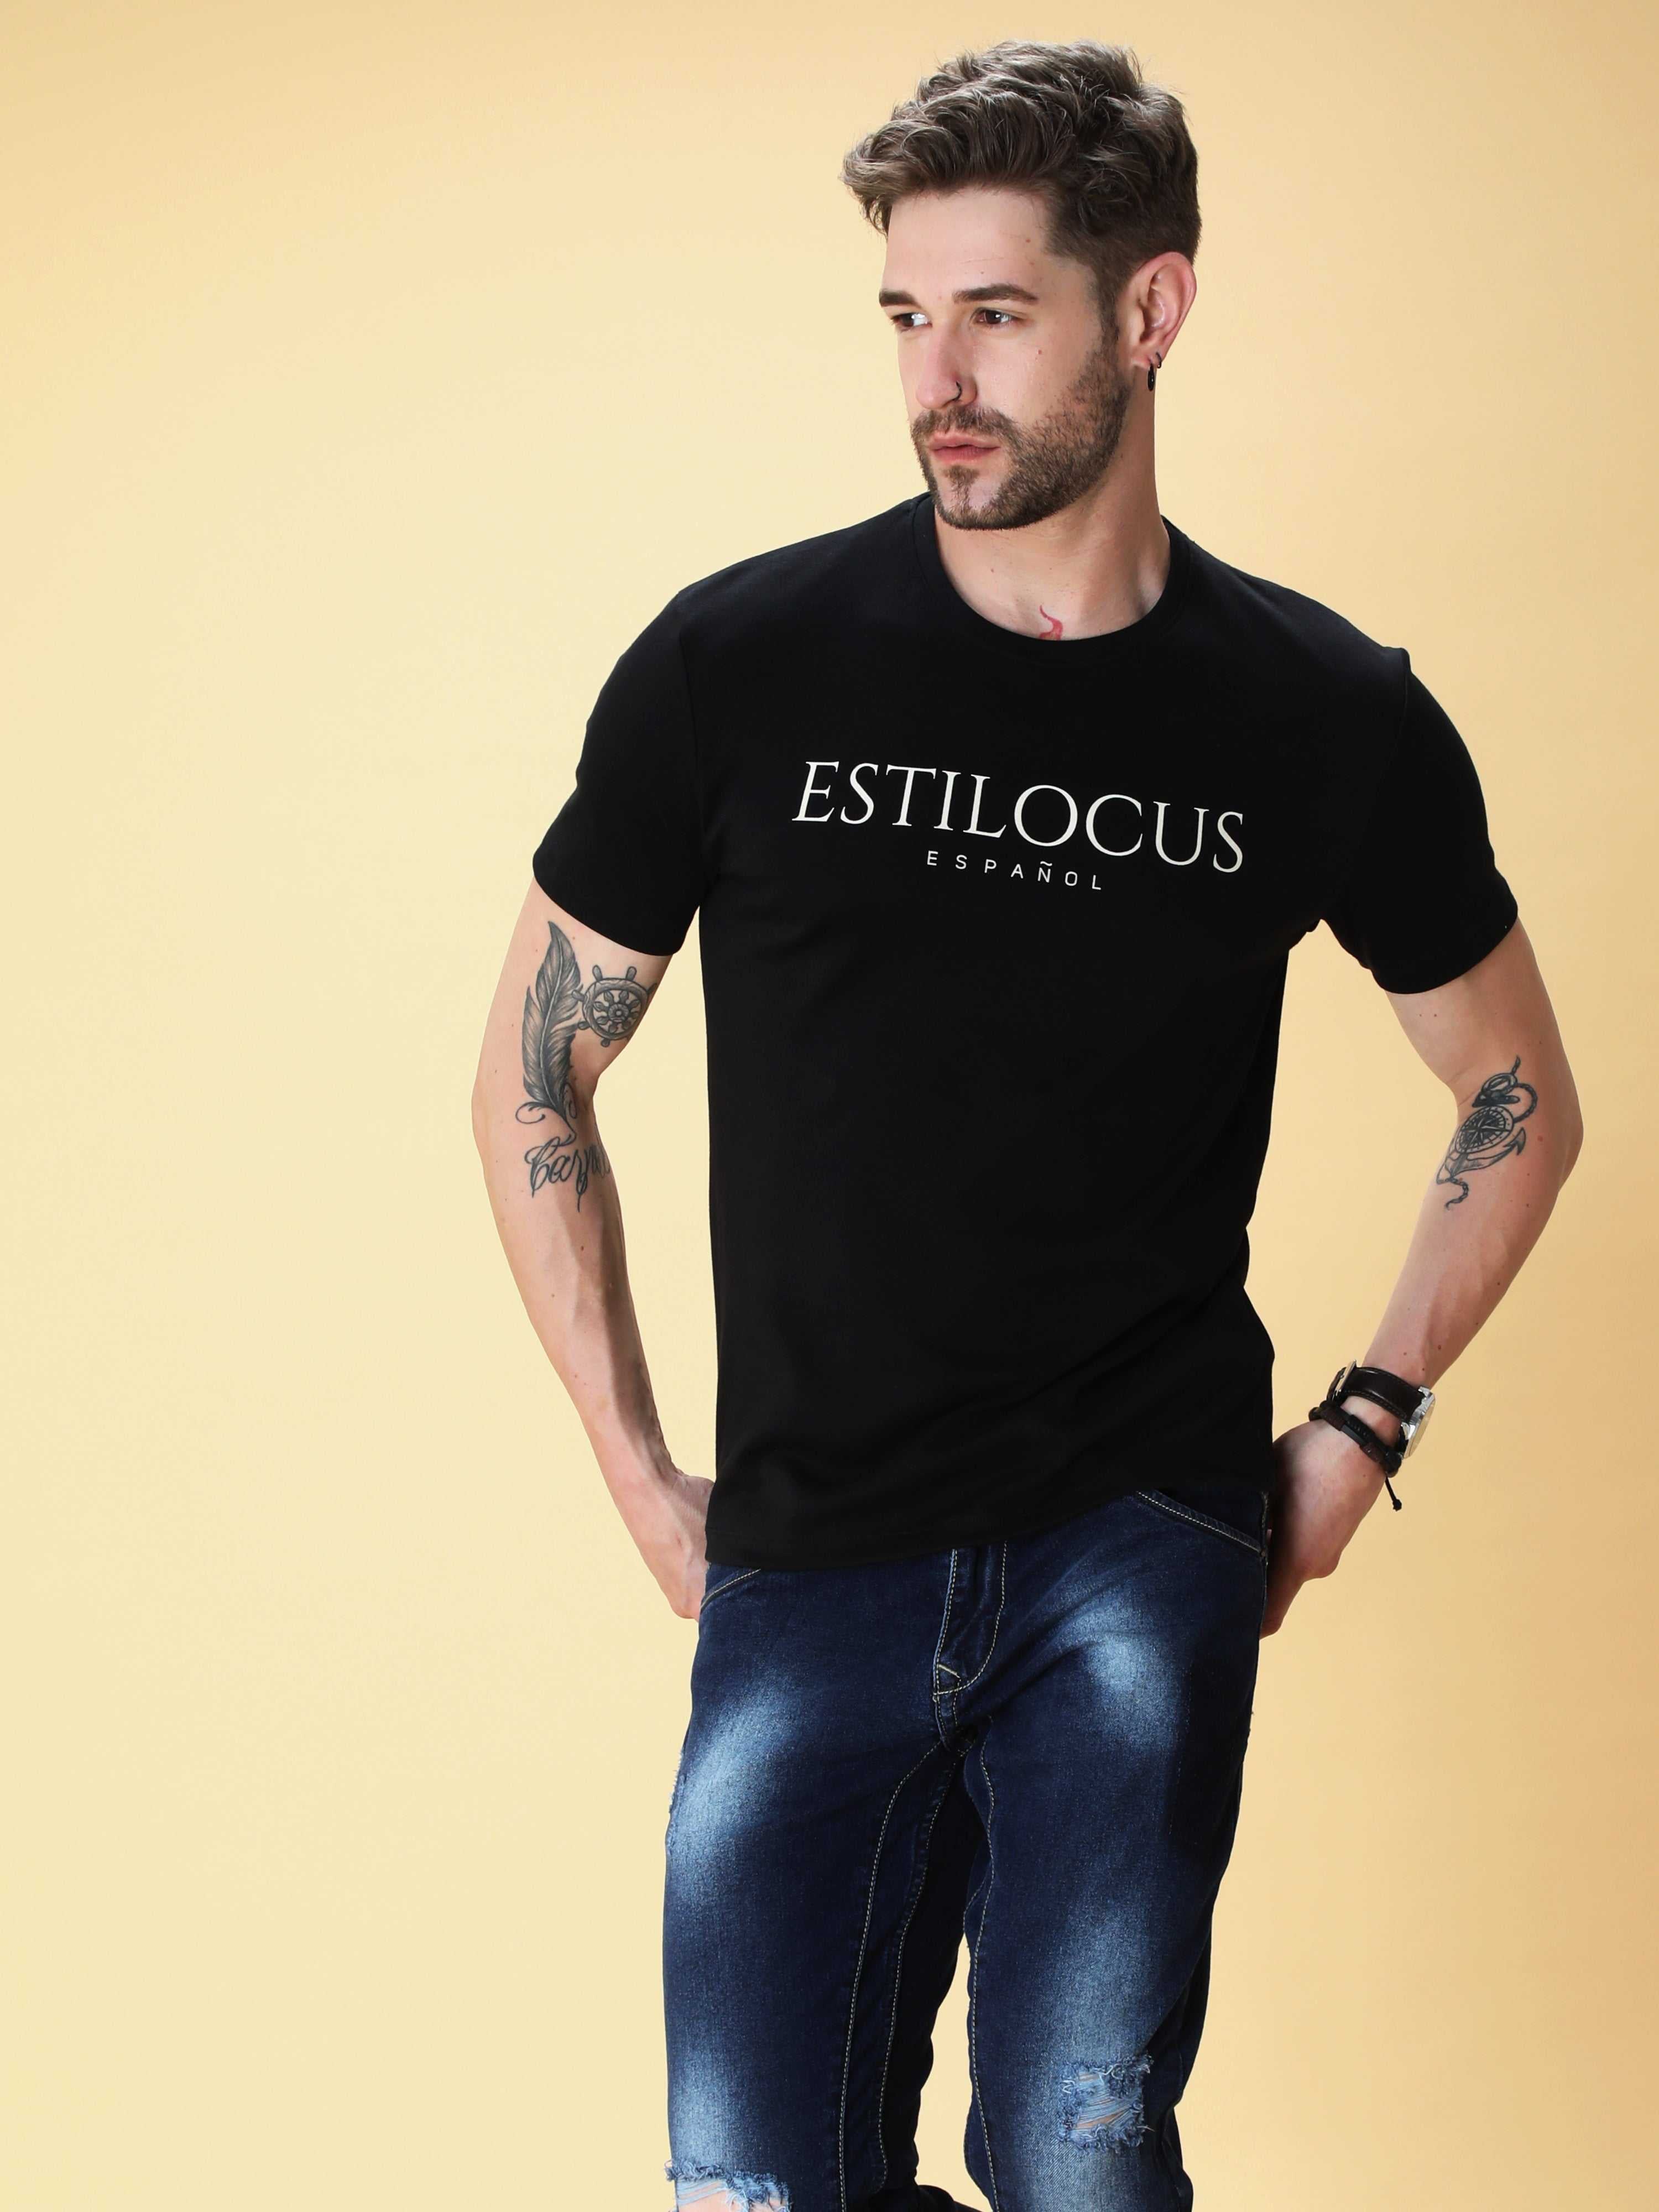 Midnight Black Crew Neck T-Shirt shop online at Estilocus. This pure cotton printed T-shirt is a stylish go-to for laidback days. Cut in a comfy regular fit. • 100% Cotton knitted interlock 190GSM• Bio washed fabric• Round neck T-shirt • Half sleeve • Sui